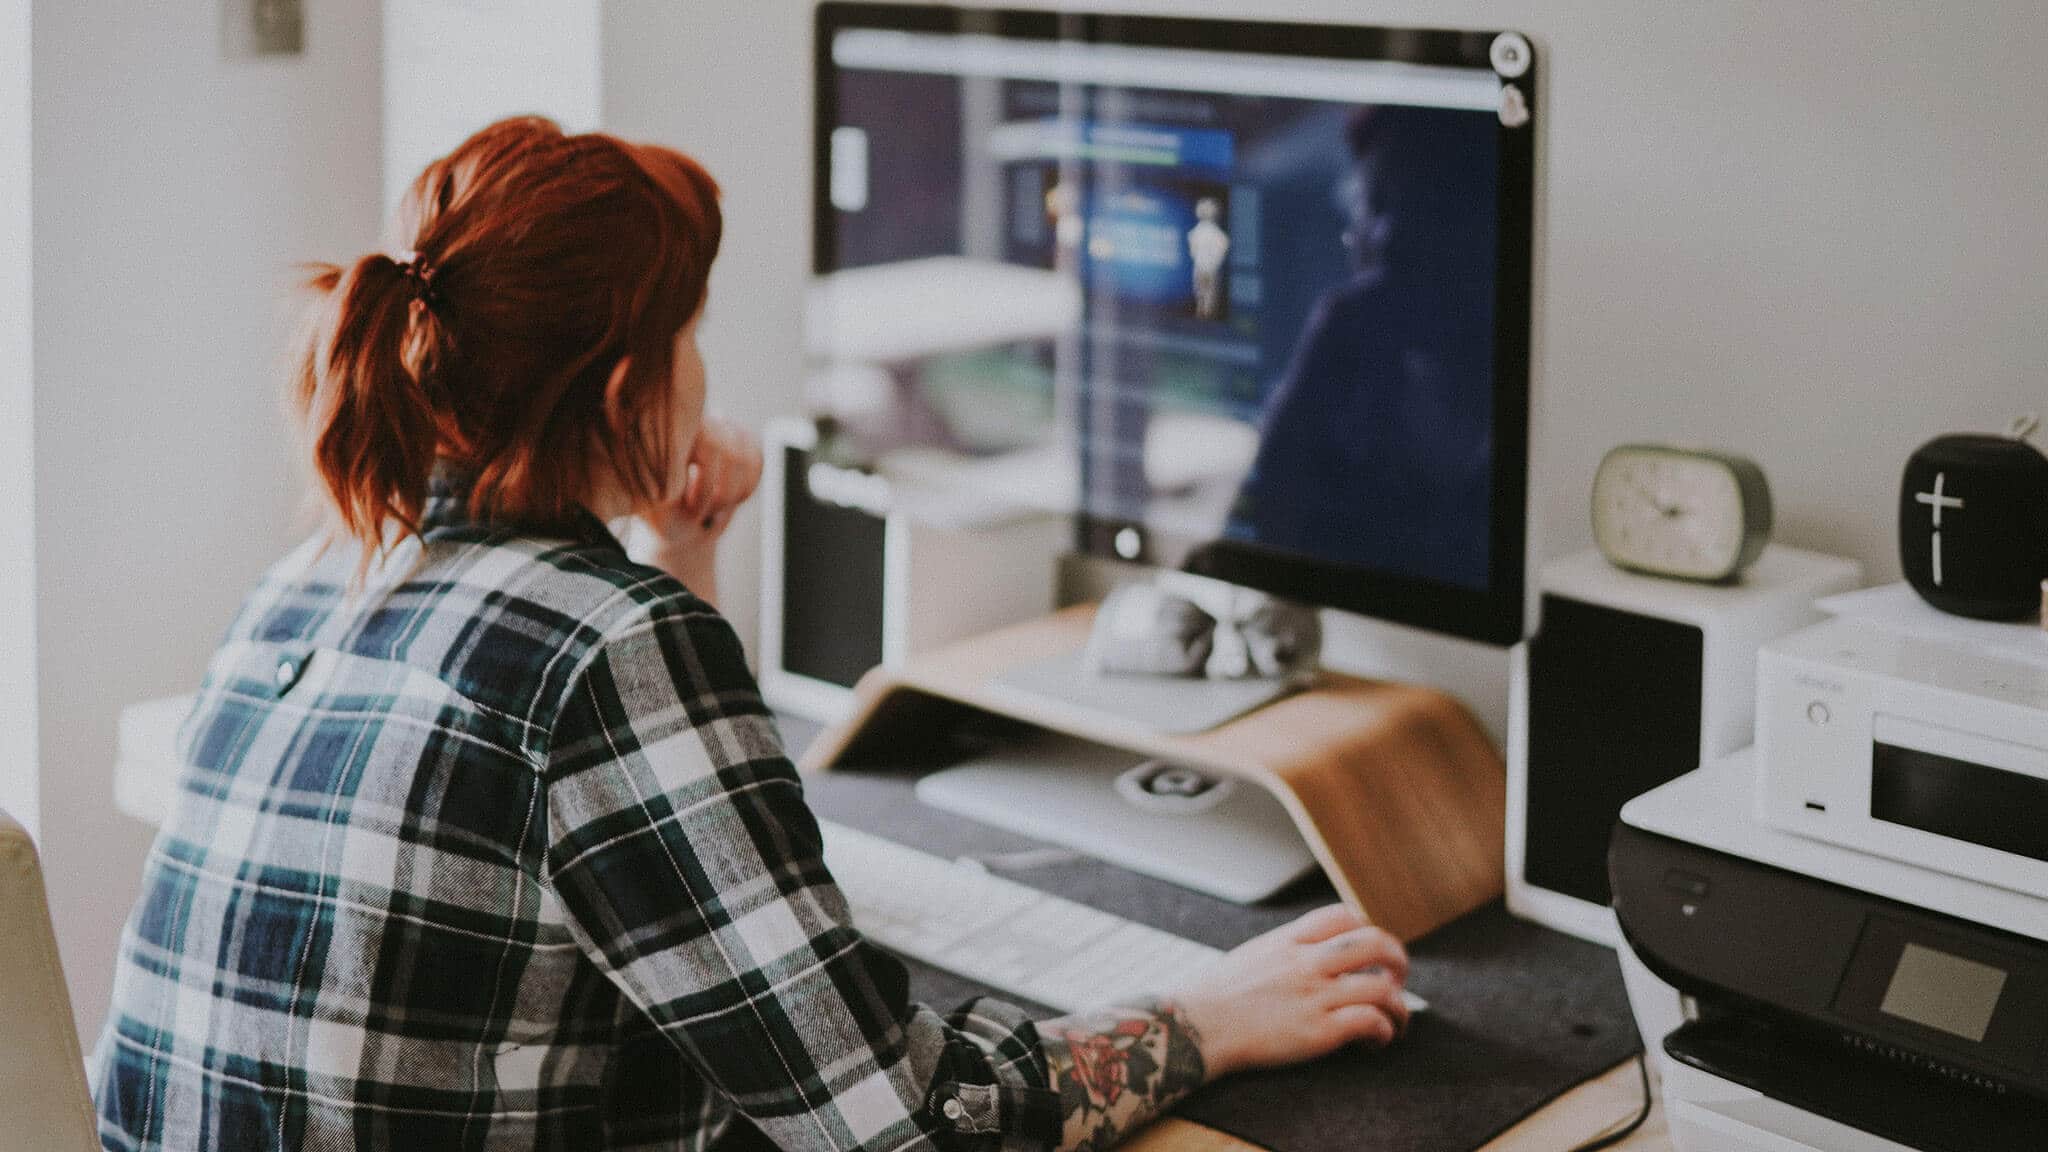 Redheaded woman in plaid shirt and arm tattoo working on desktop